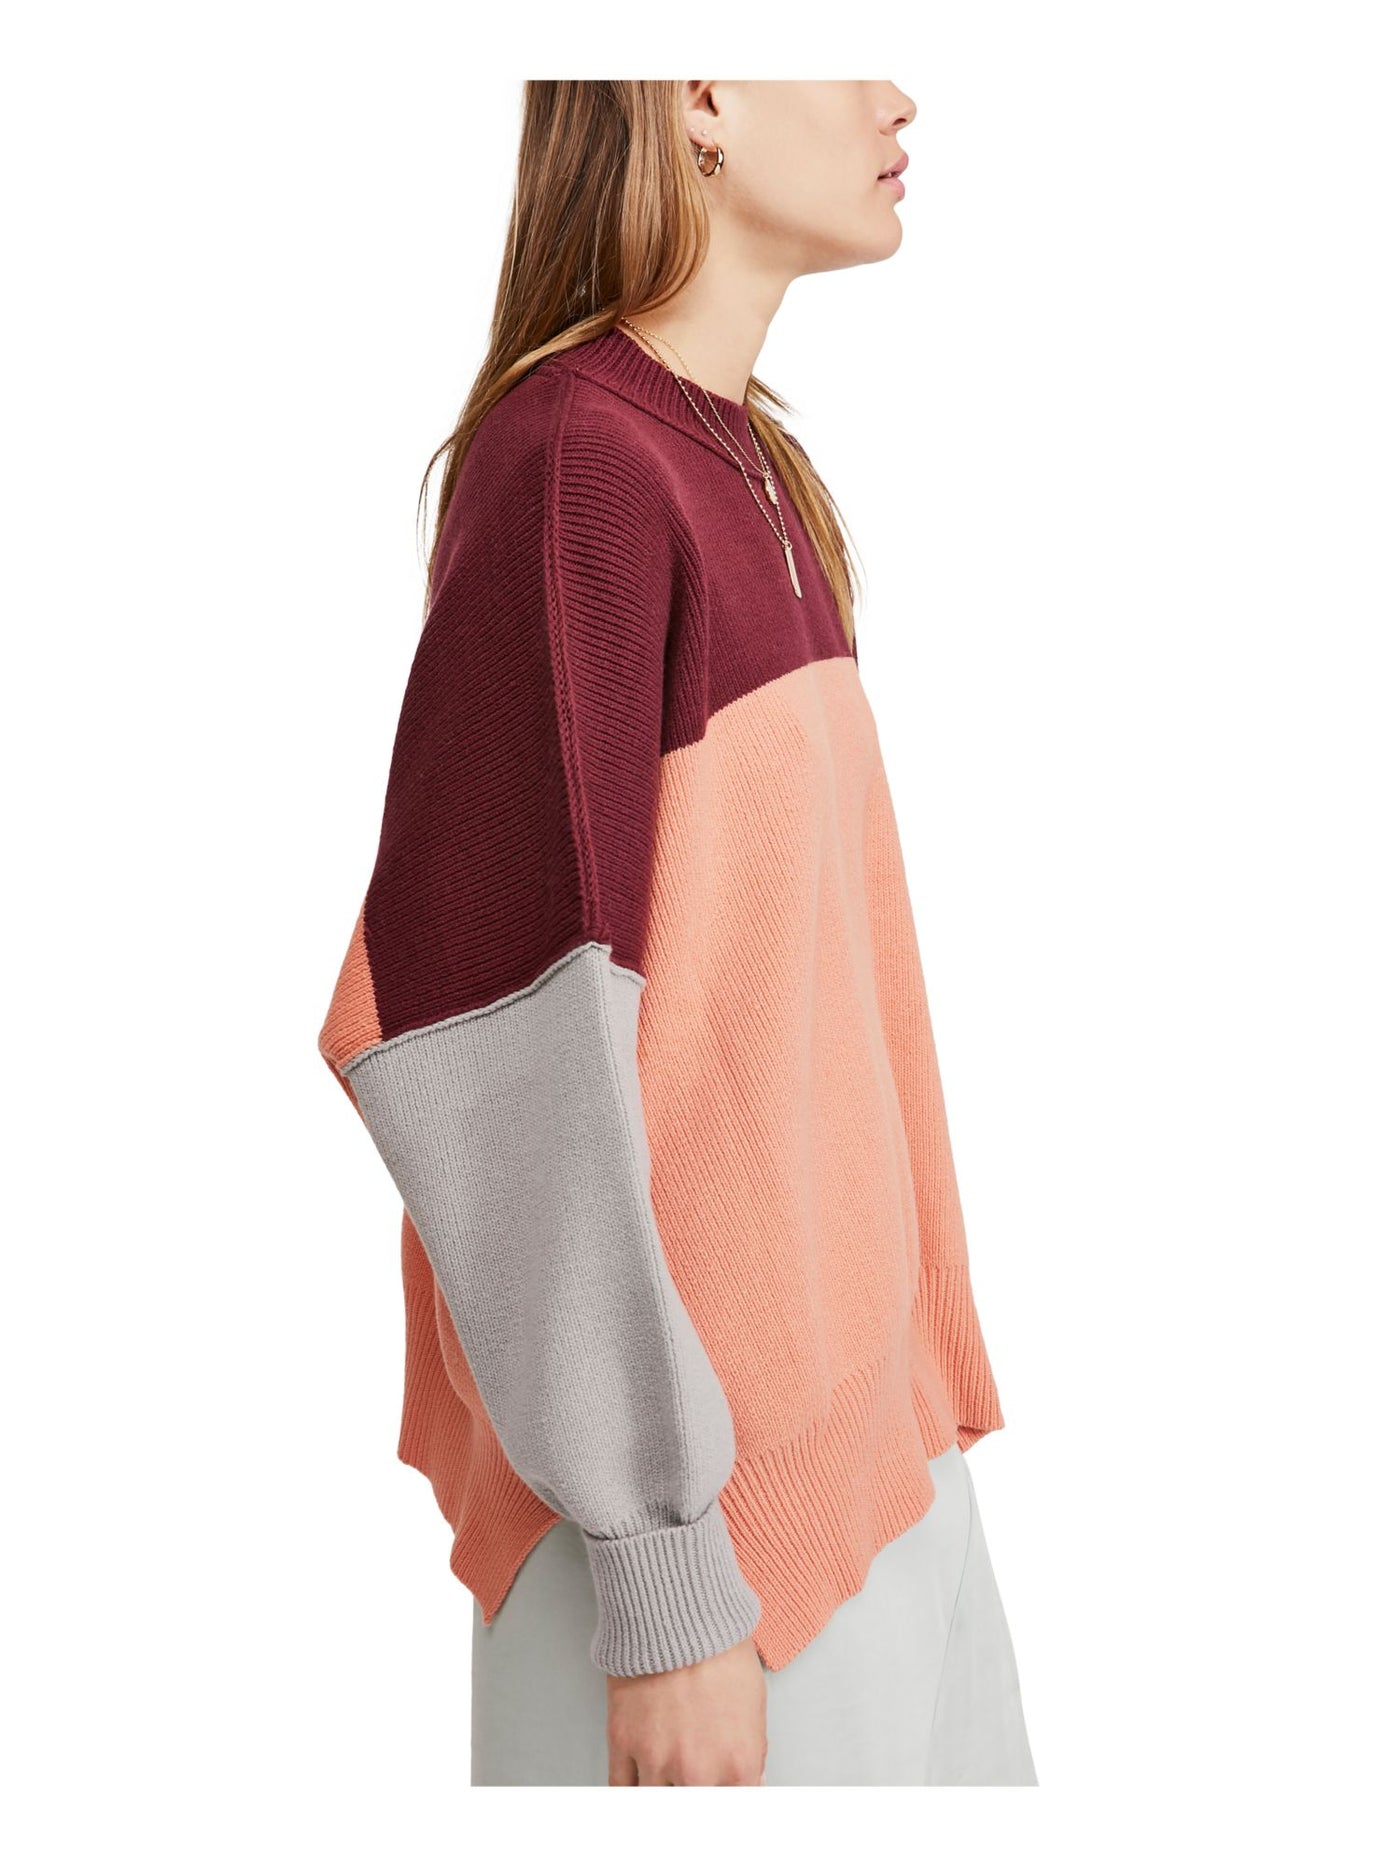 FREE PEOPLE Womens Burgundy Color Block Long Sleeve T-Shirt Size: XS